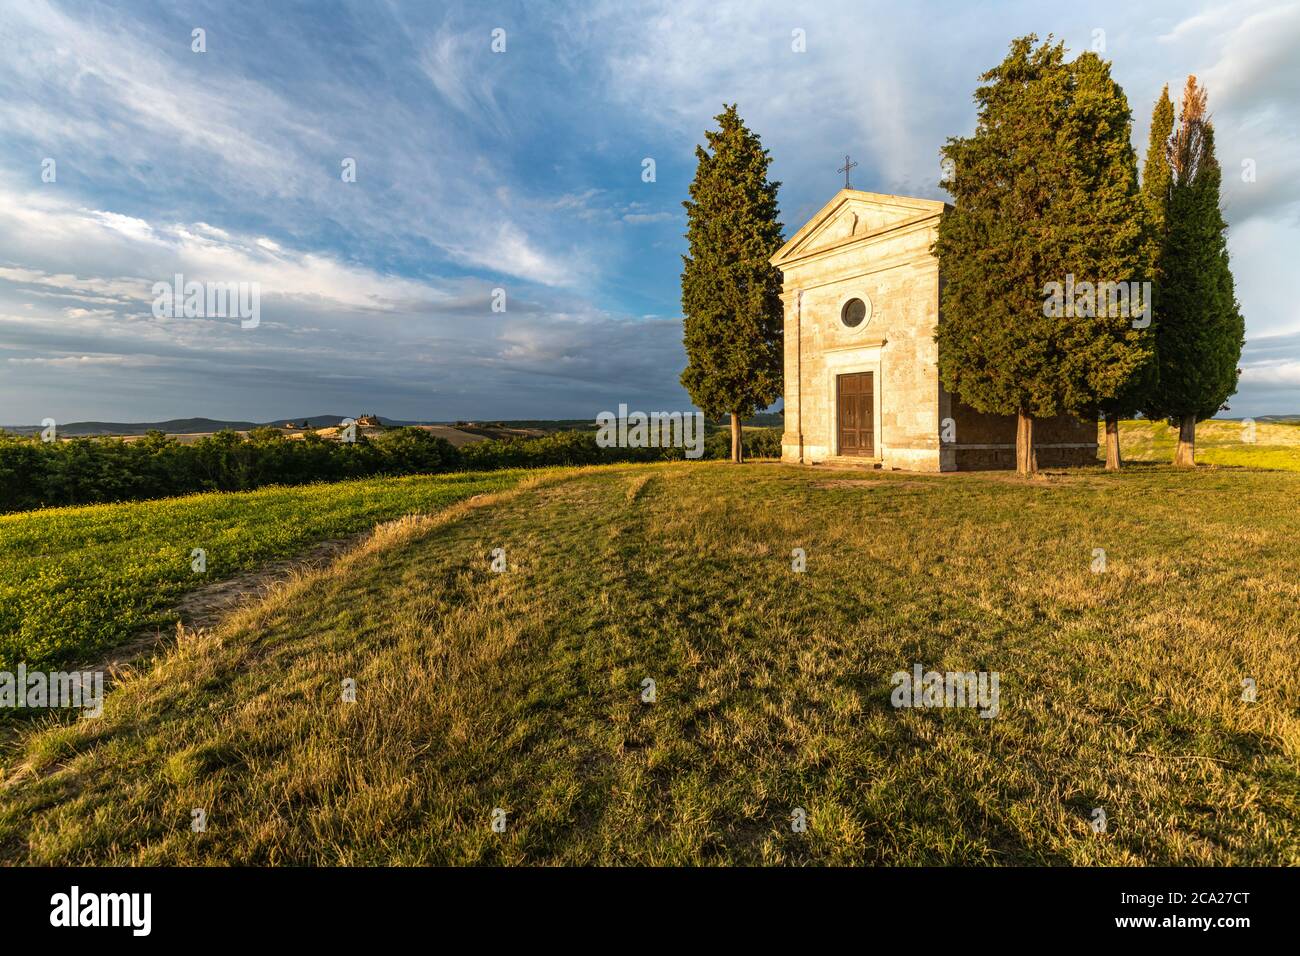 Wide angle view of the iconic Tuscanian hilltop chapel of Vitaleta, surrounded by cypresses, under a summer blue sky with streaked clouds Stock Photo